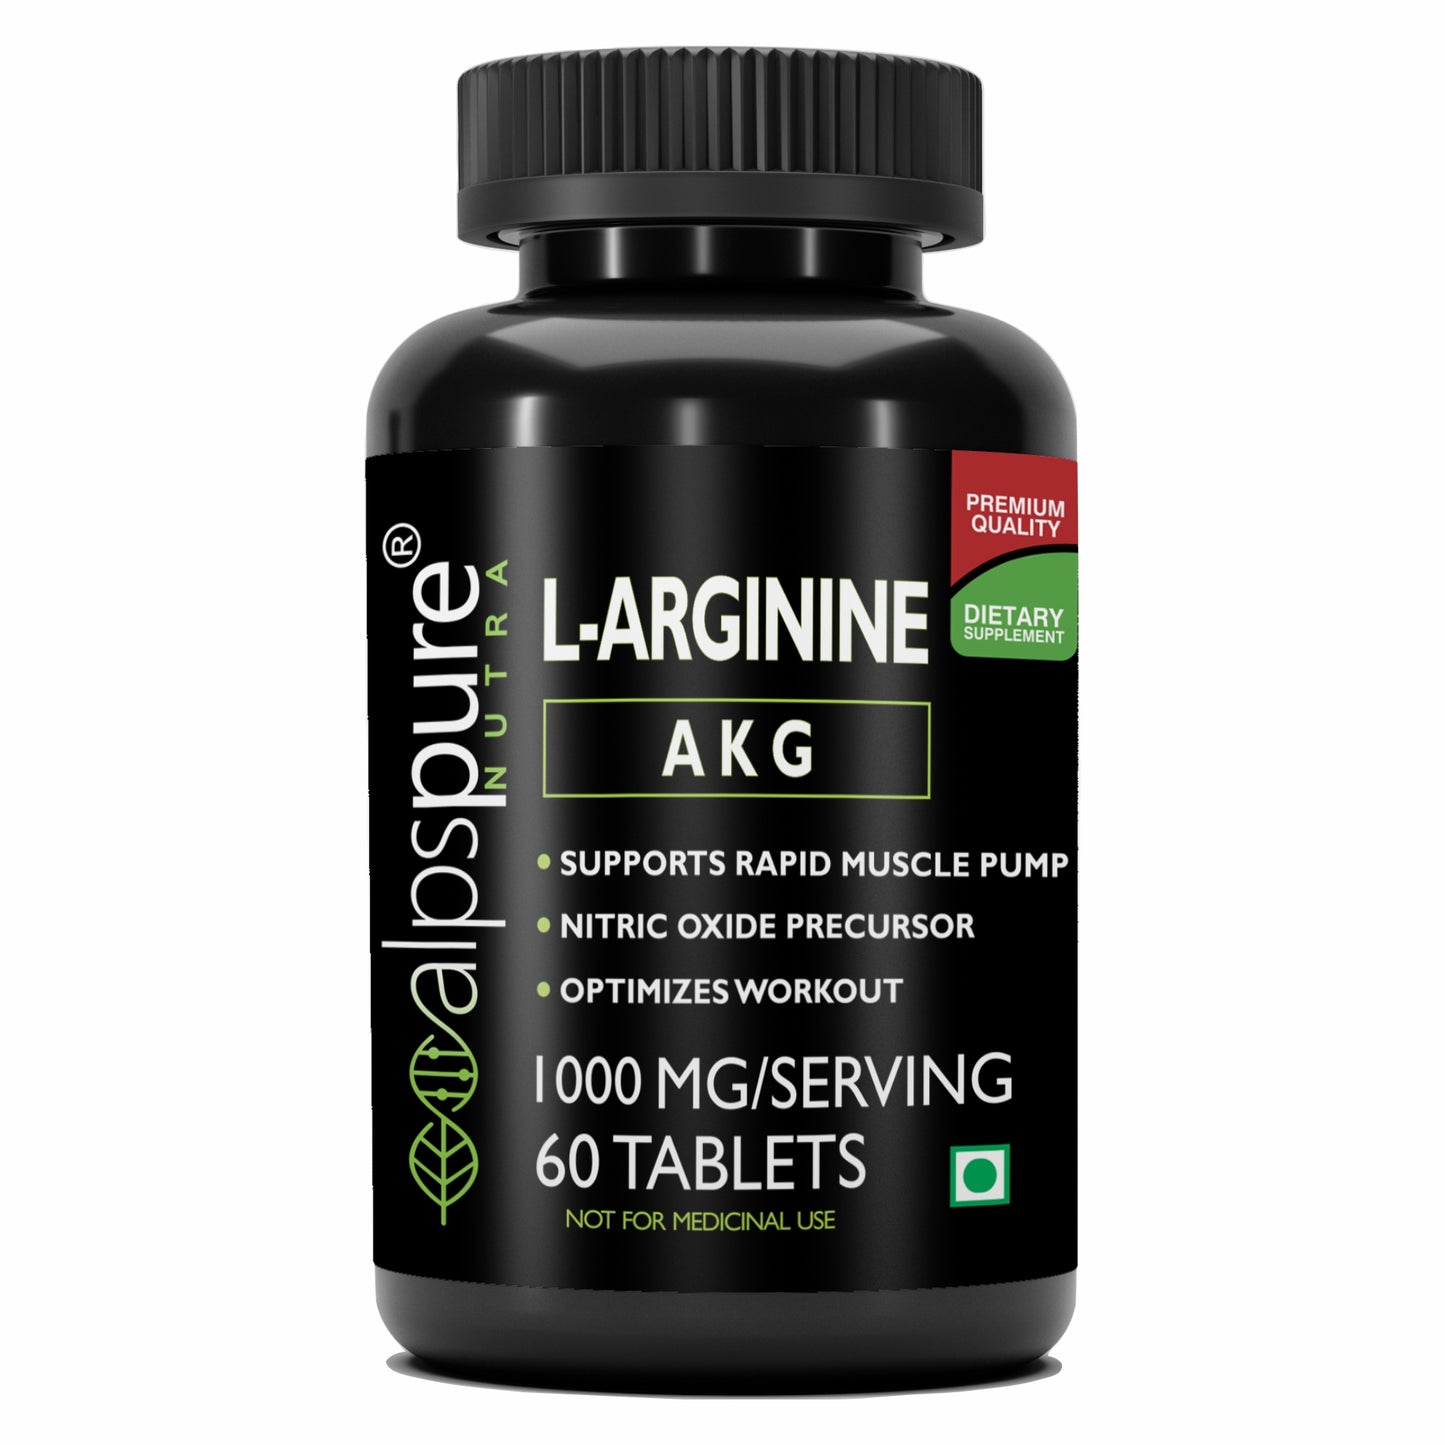 Promote Circulation & Muscle Growth with L-Arginine - Tablets